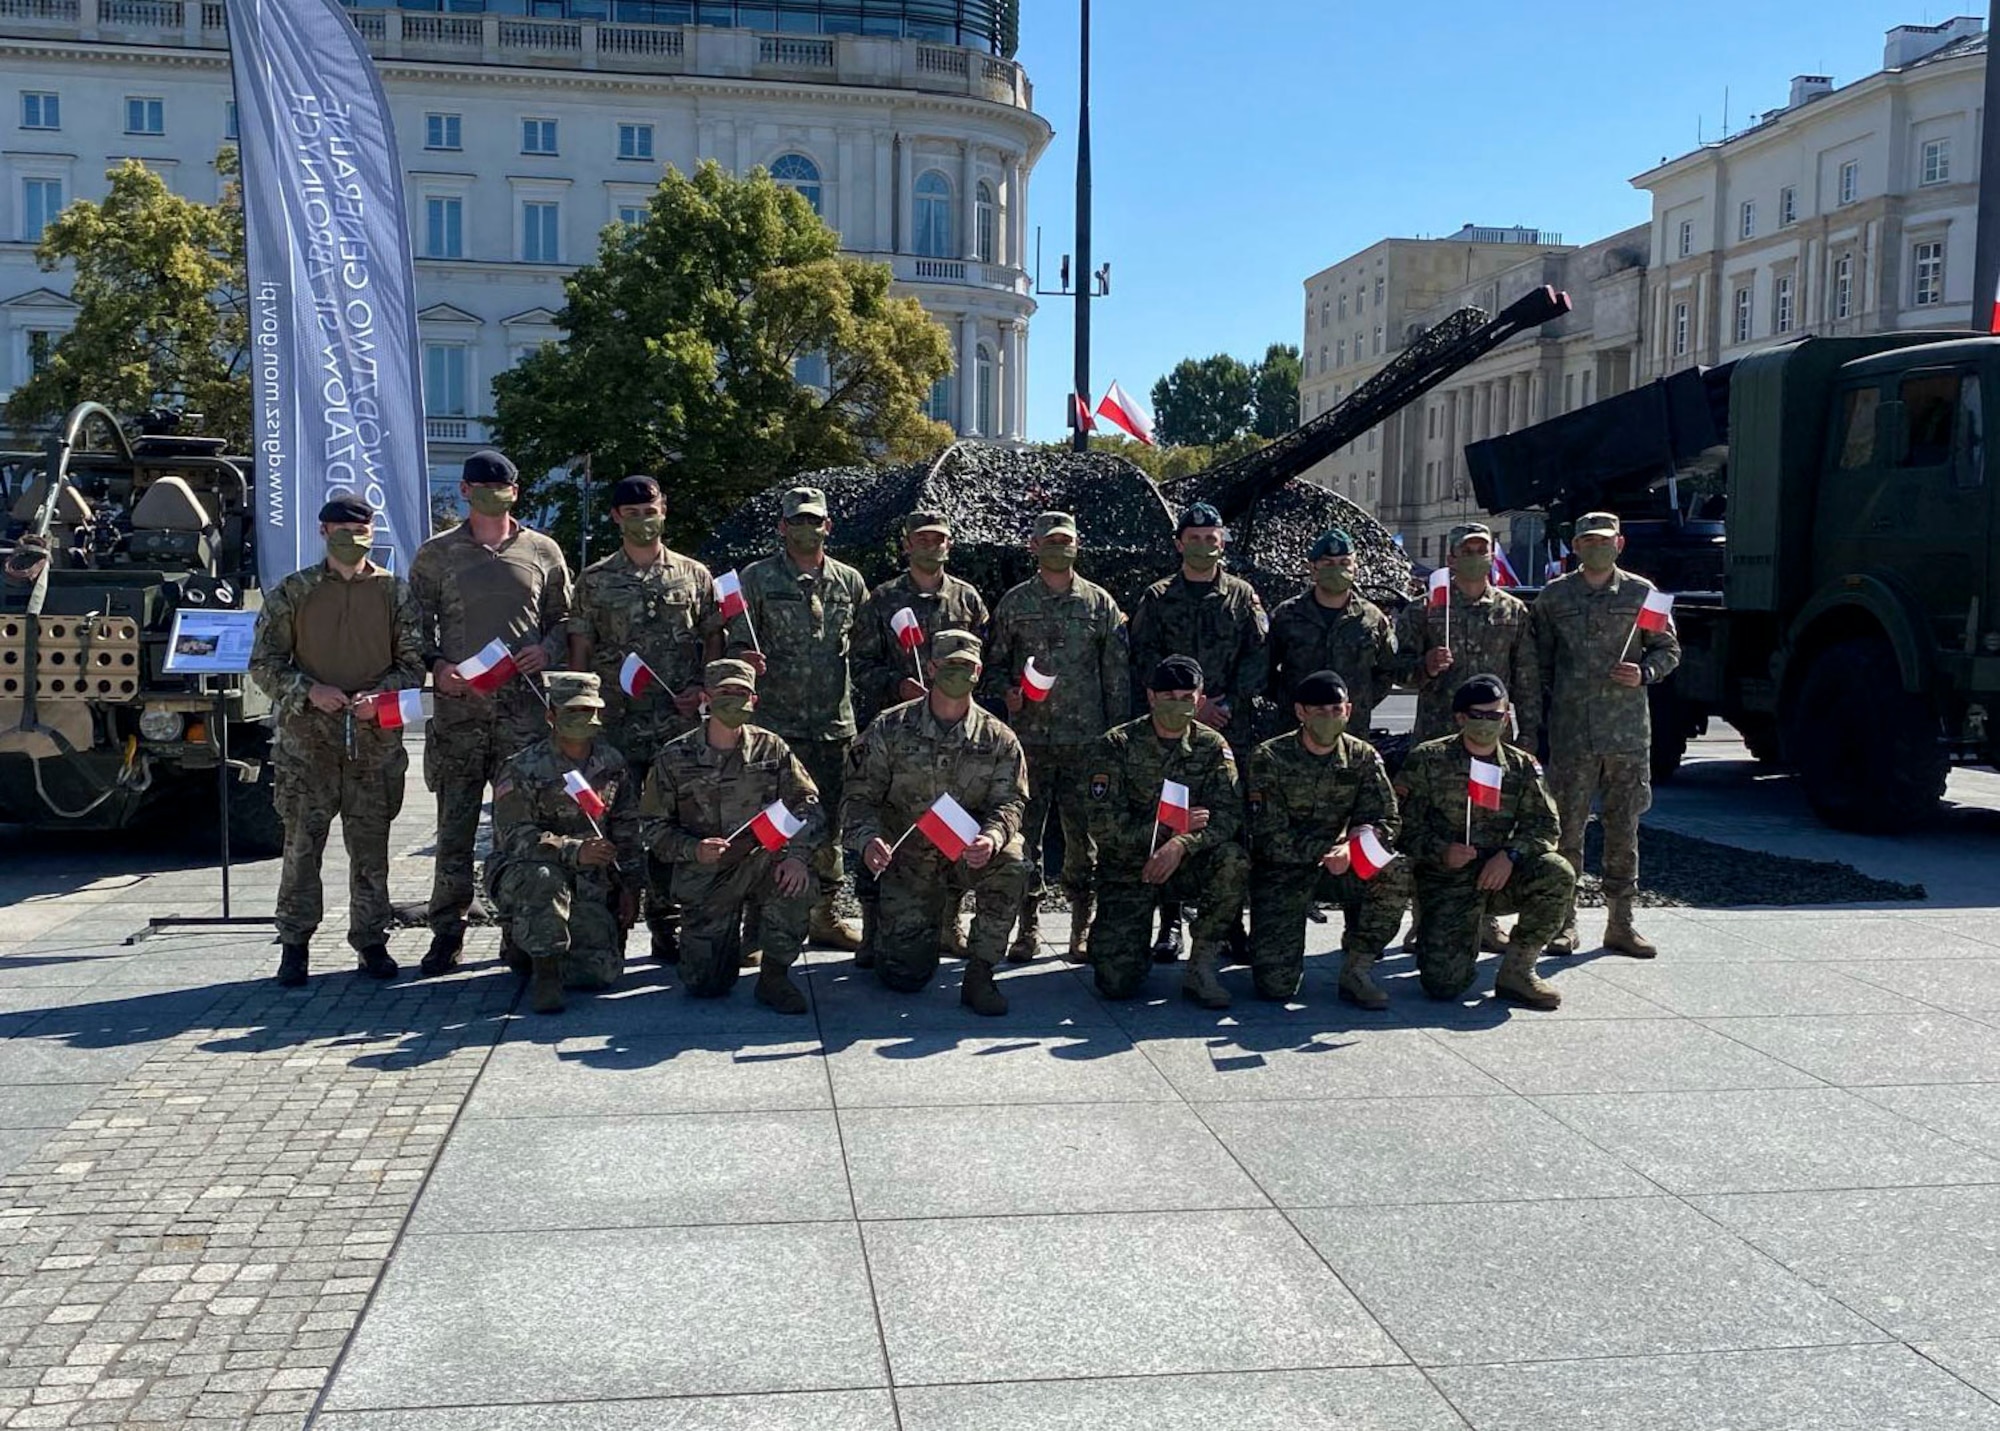 Military members from the United States, Poland, United Kingdom, Romania, and Croatia gather for a group photo during Polish Armed Forces Day at Warsaw, Poland, August 15, 2020. The U.S. military presence in Poland strengthens NATO deterrence and contributes to security in the region. Enhancing that presence would help continue to ensure democracy, freedom and respect for sovereignty. (U.S. Air Force photo by Senior Airman Melody W. Howley)